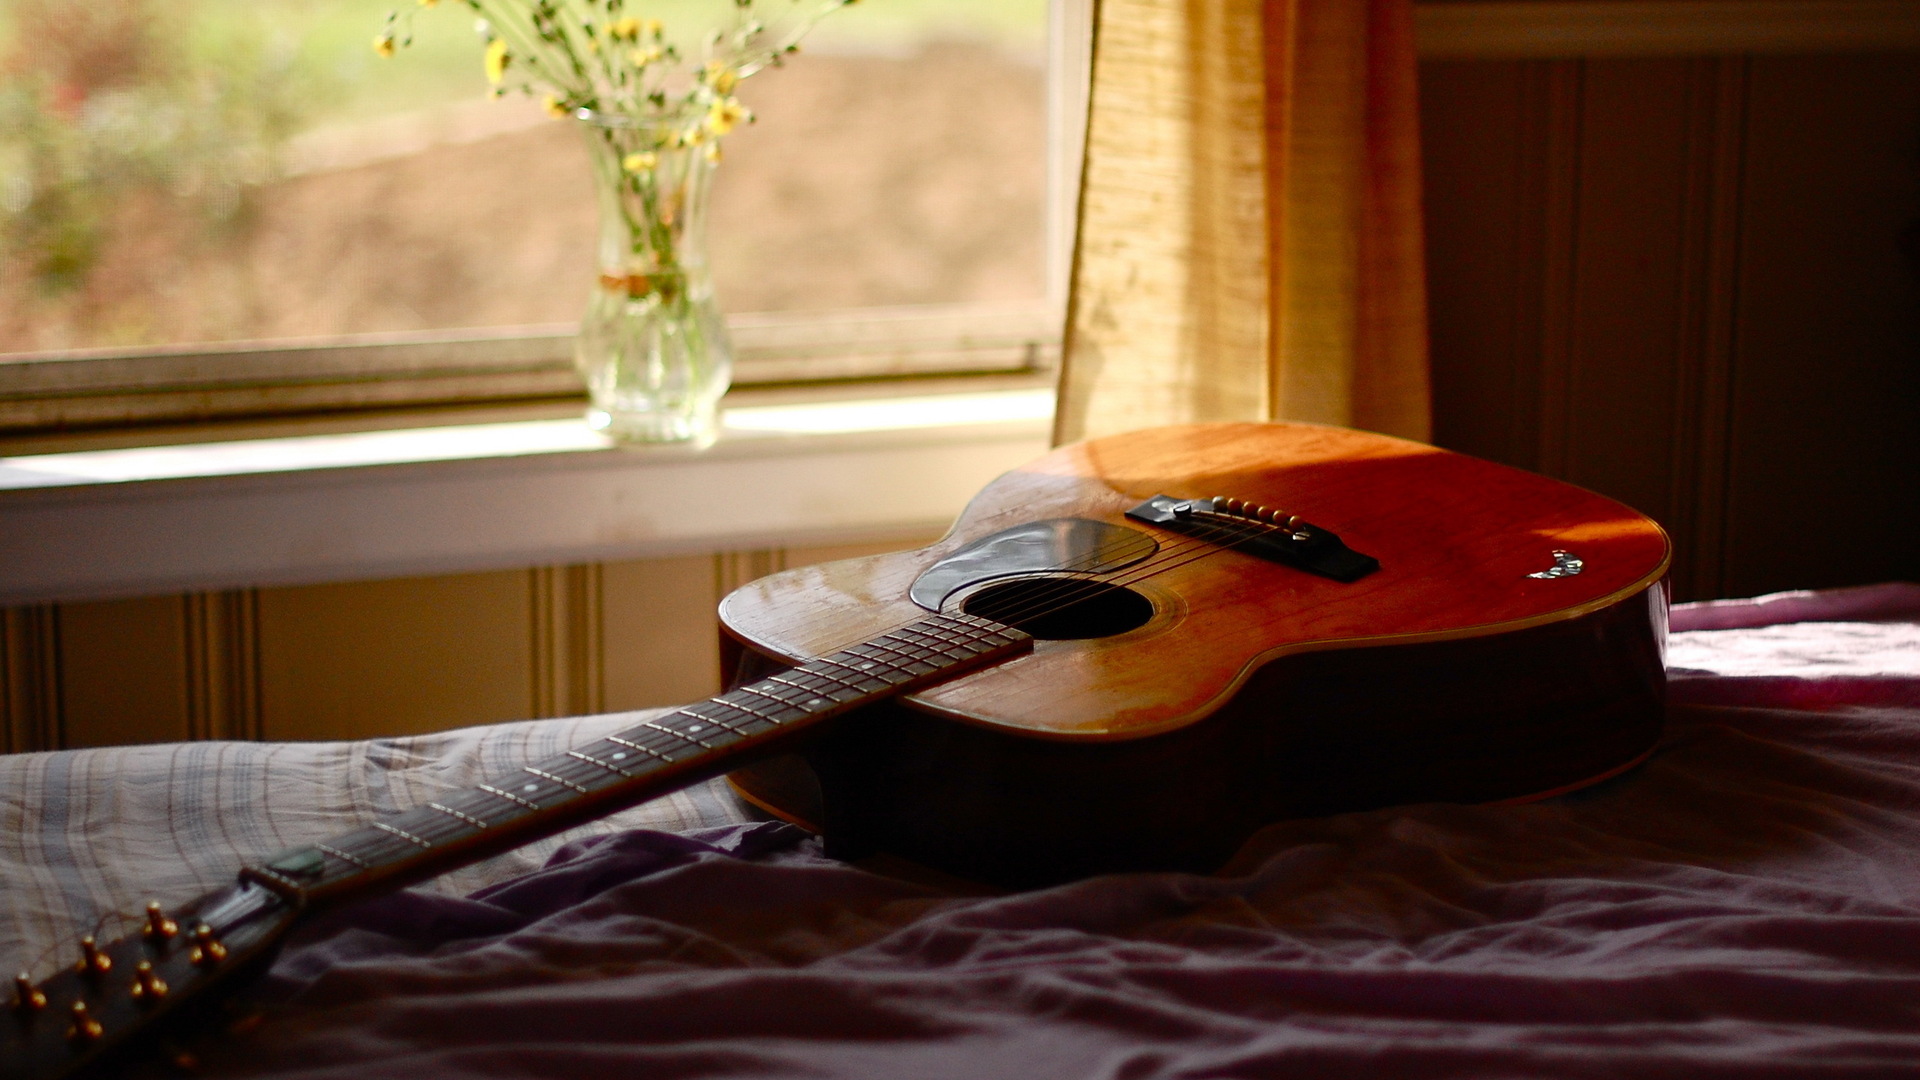 Acoustic Guitar Wallpaper High Definition Quality Widescreen